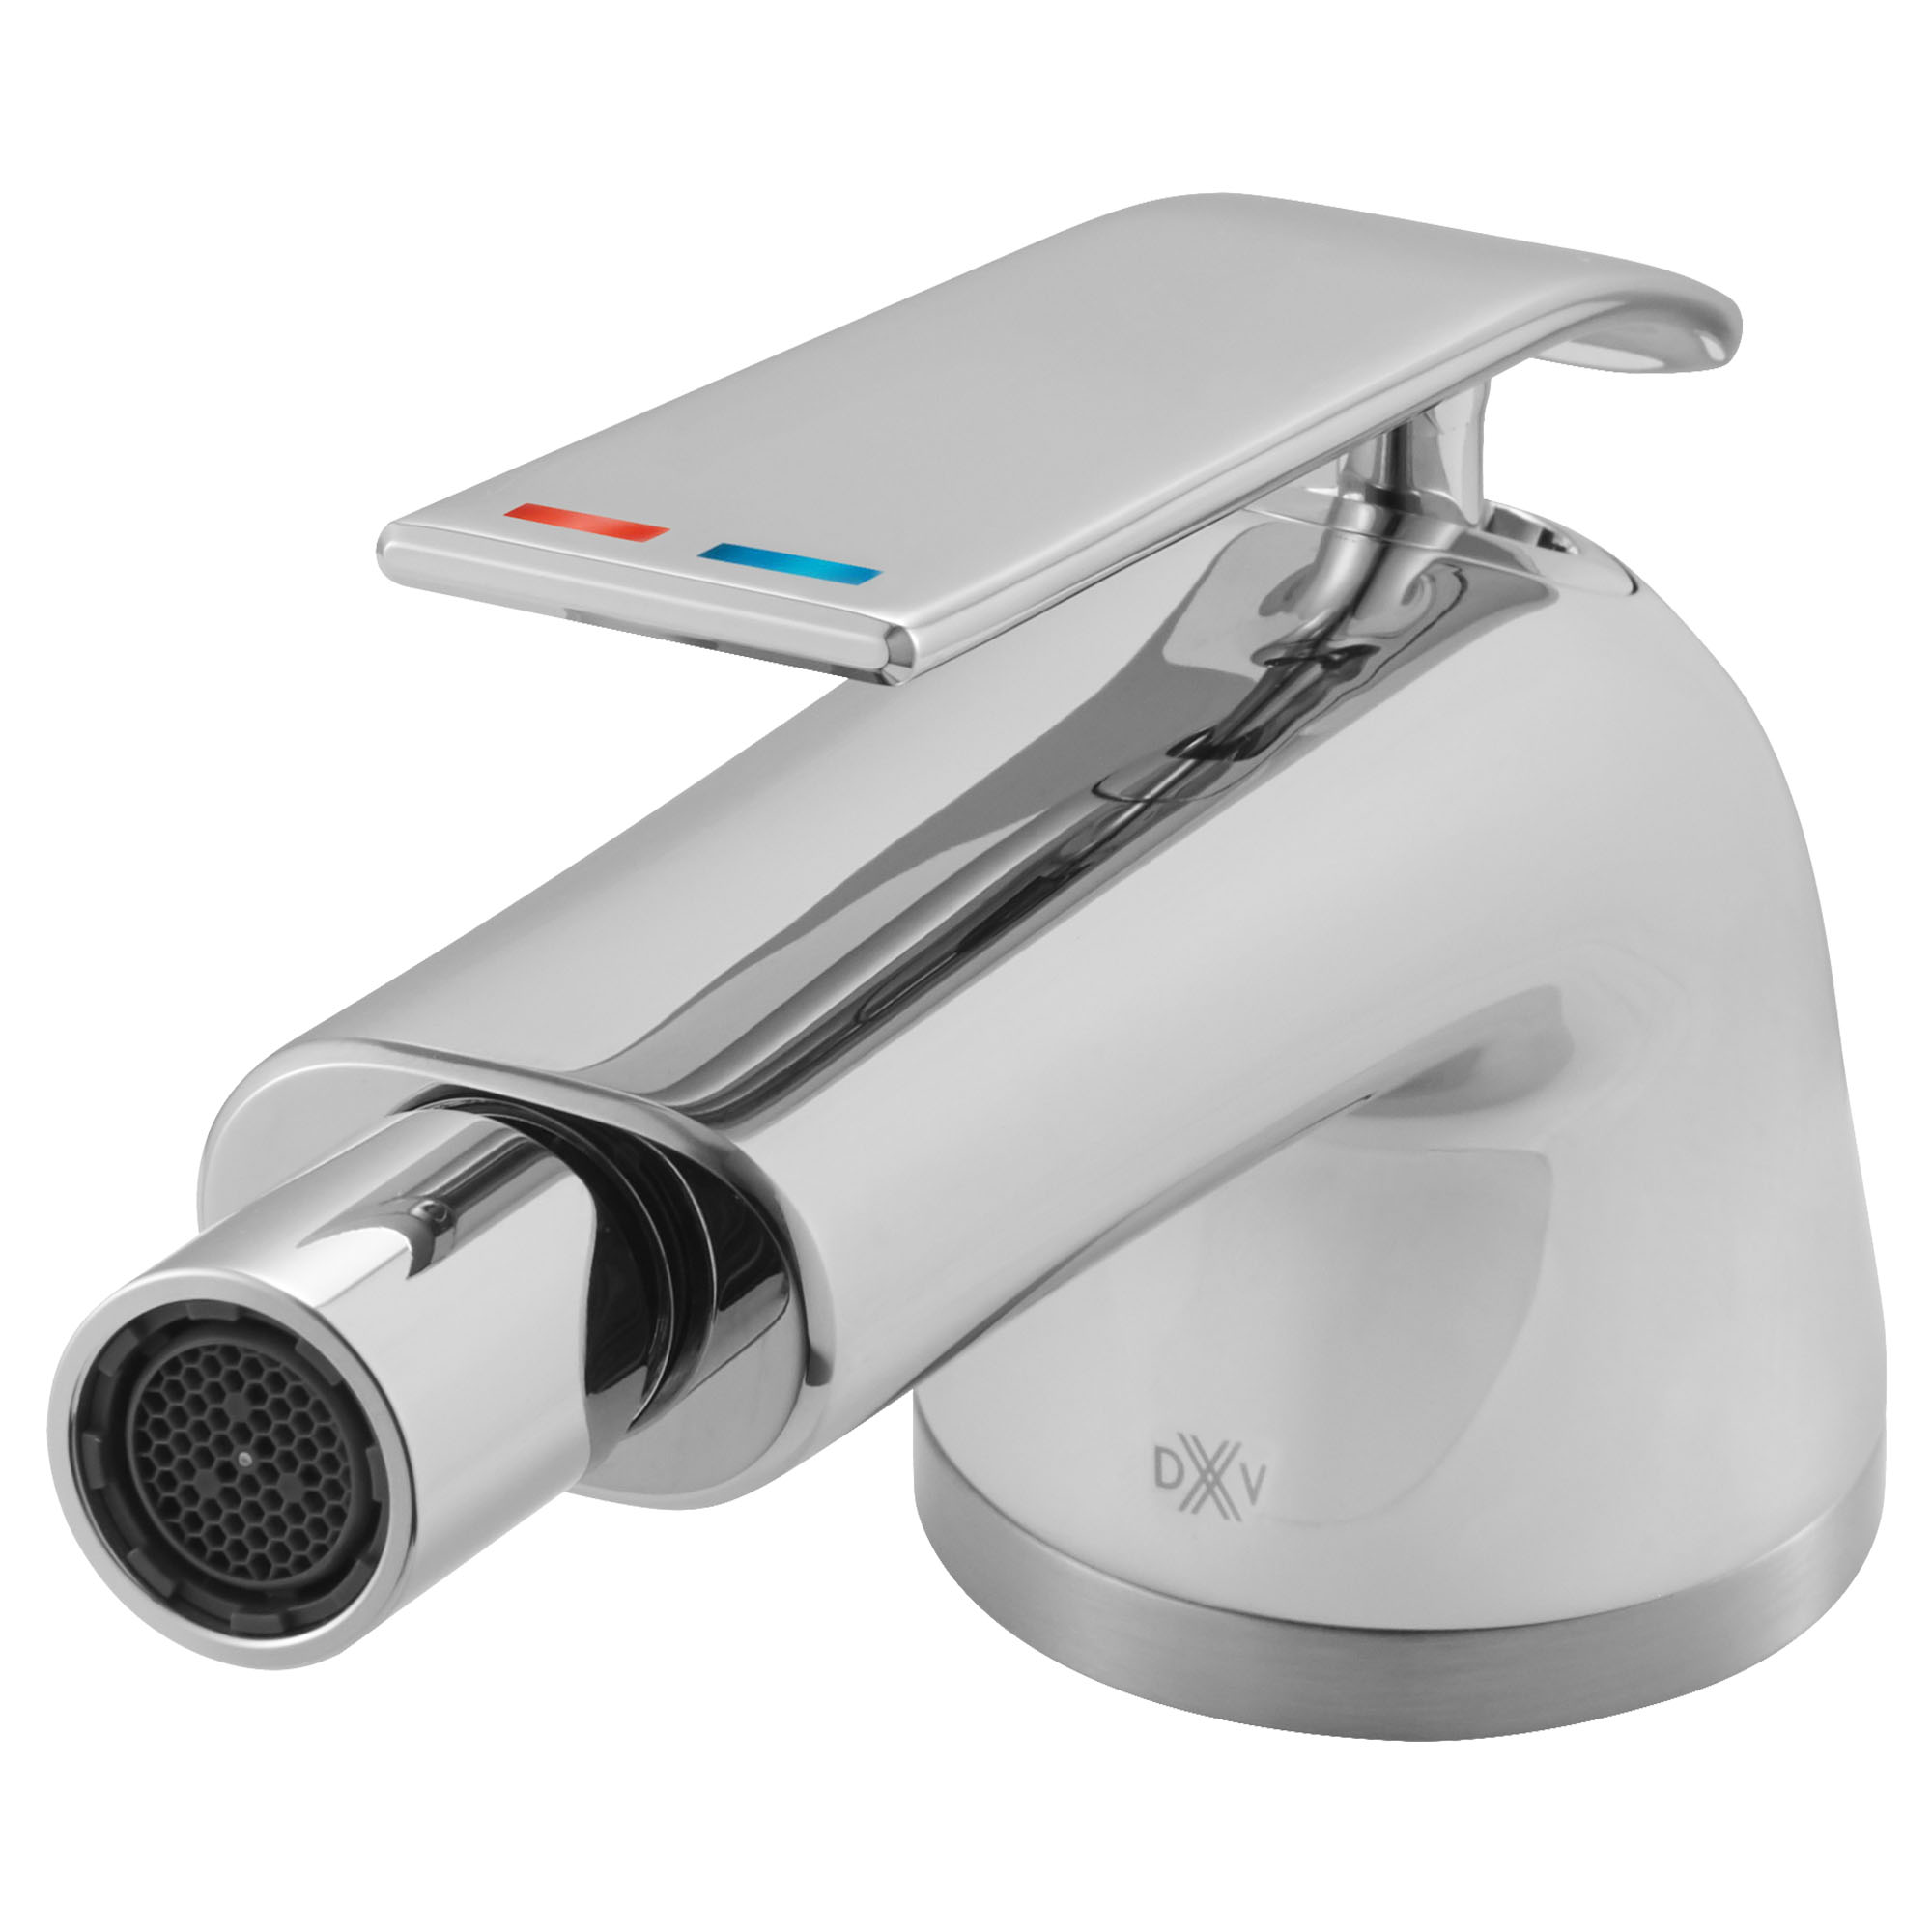 DXV Modulus Single Hole Bidet Faucet with Indicator Markings and Lever Handle